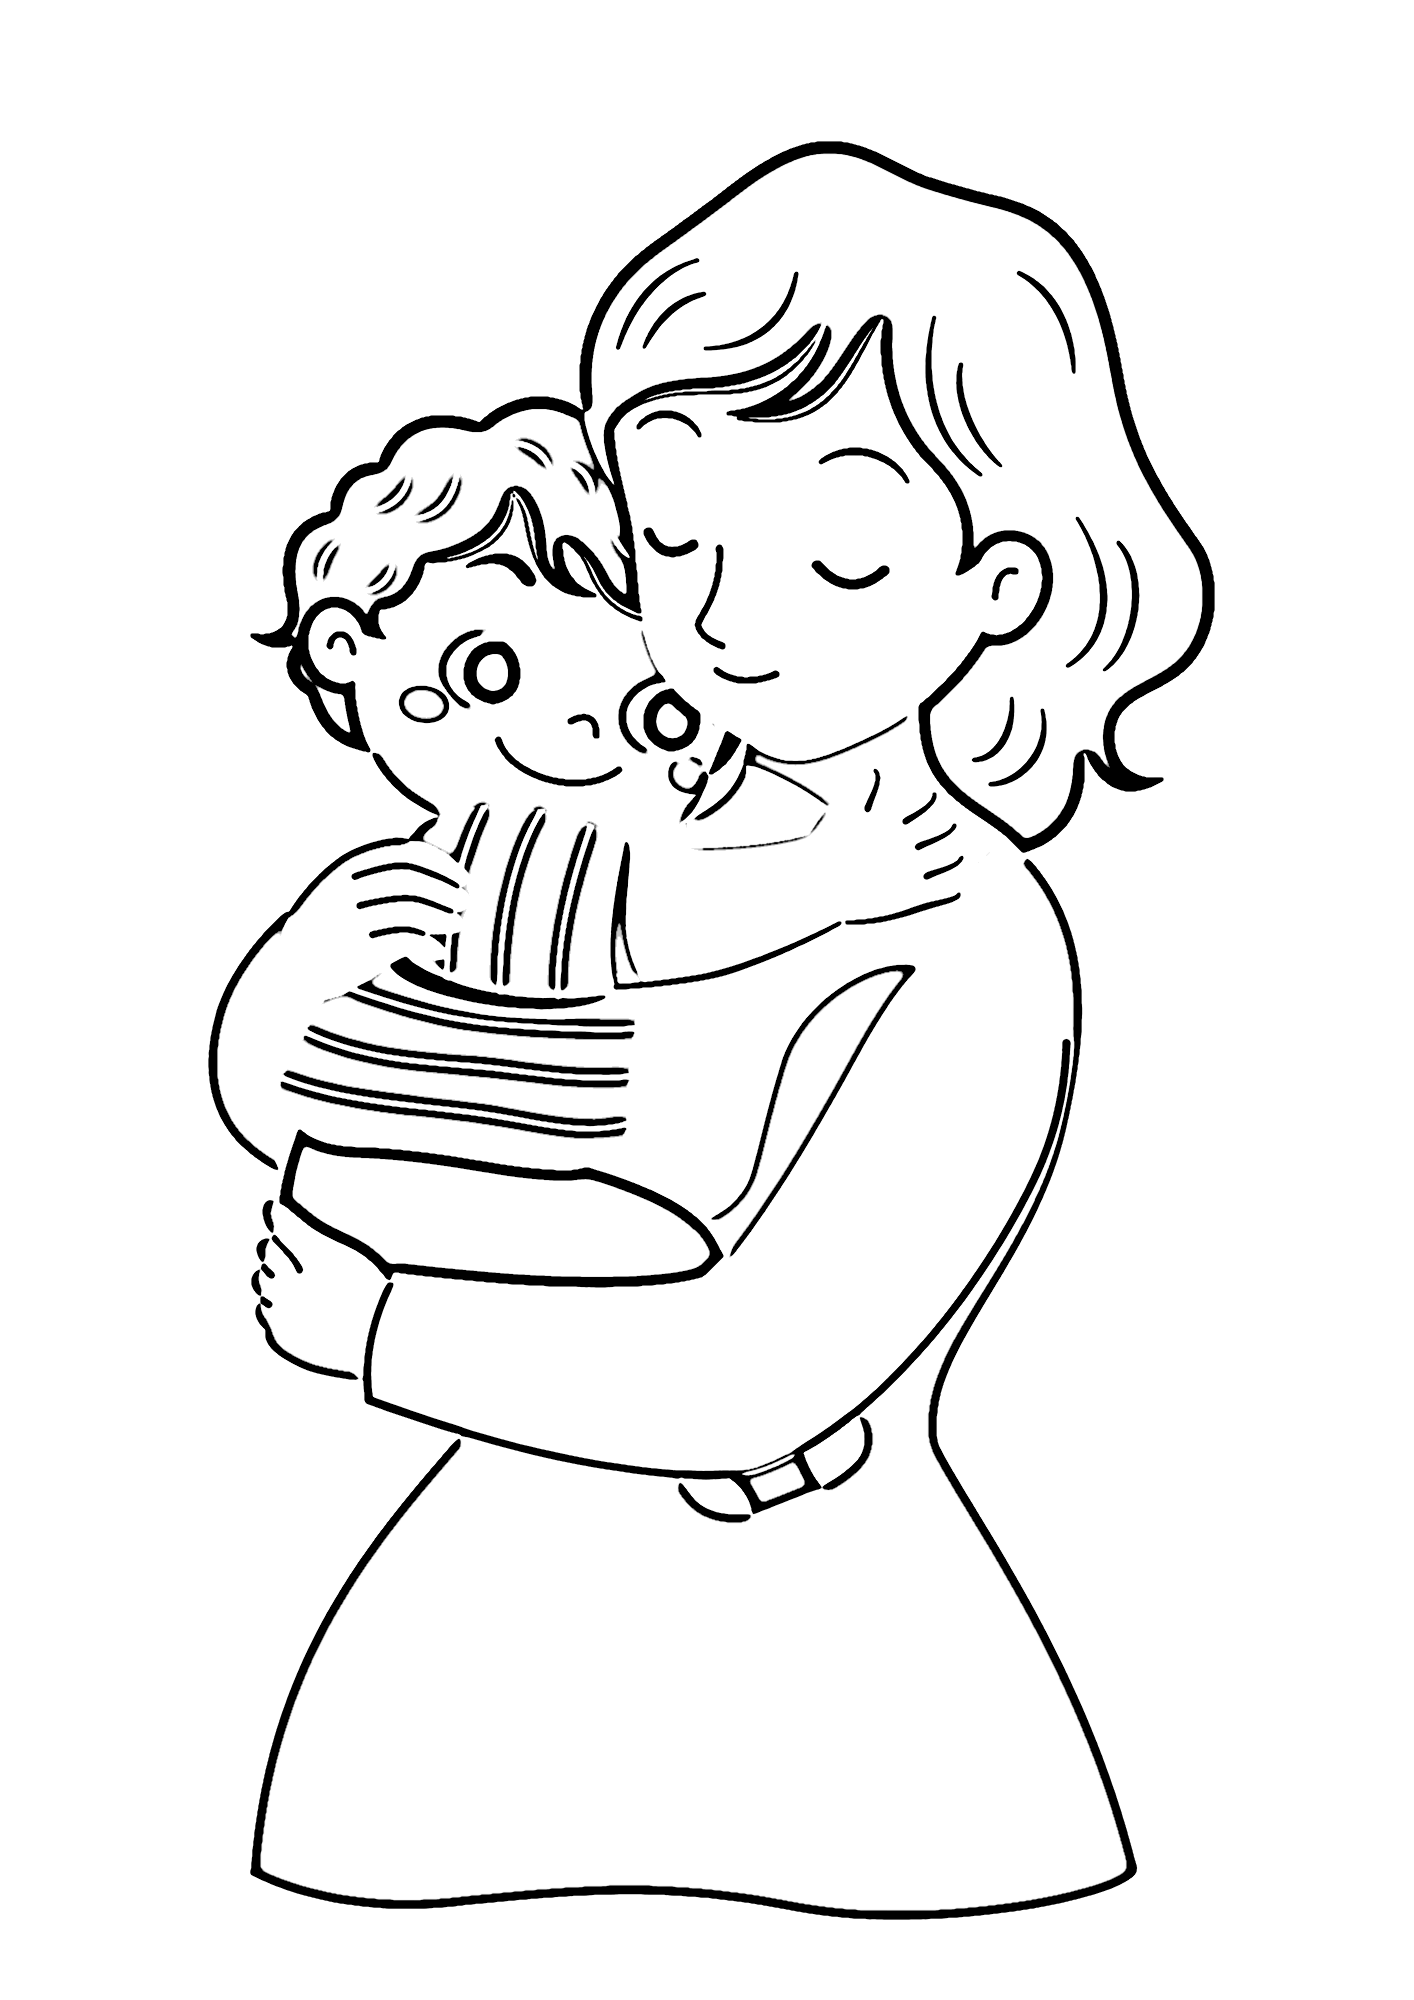 Cute Mom And Baby Coloring Page